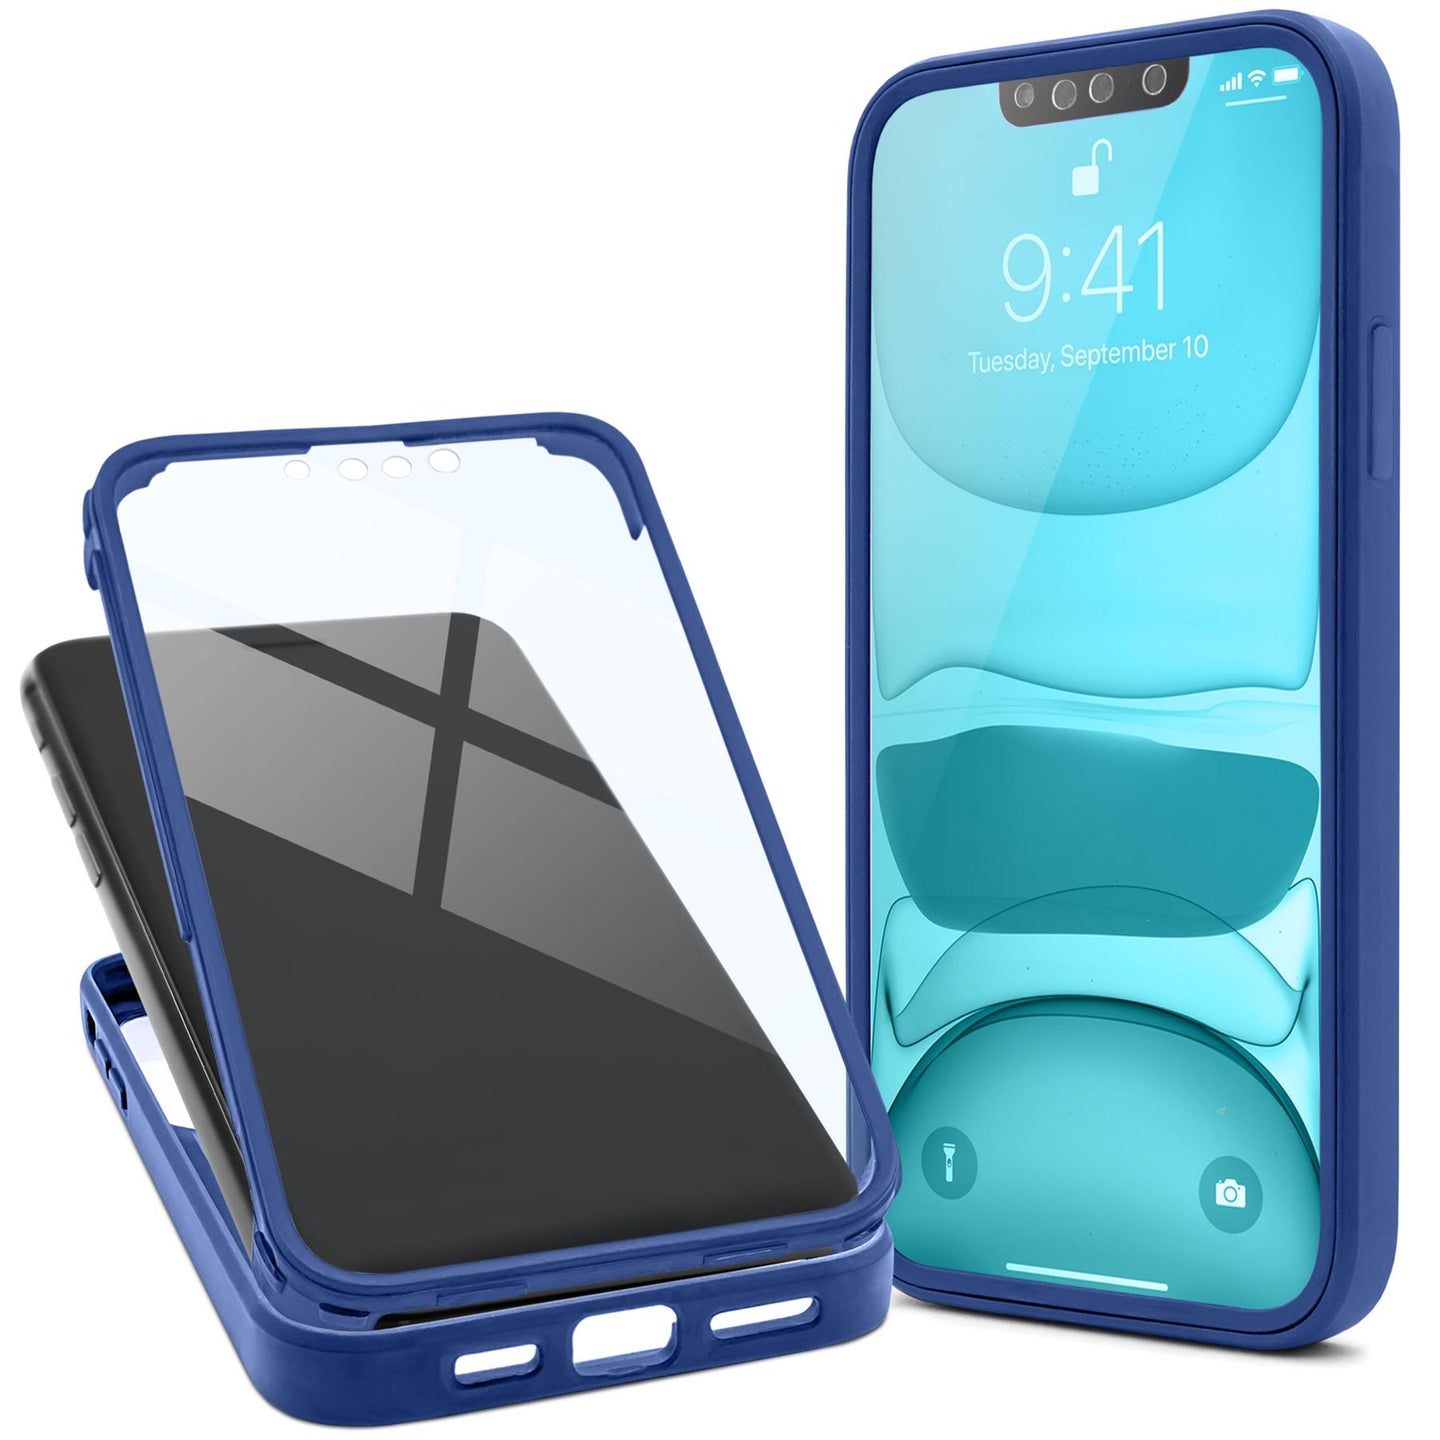 Moozy 360 Case for iPhone 14 - Blue Rim Transparent Case, Full Body Double-sided Protection, Cover with Built-in Screen Protector